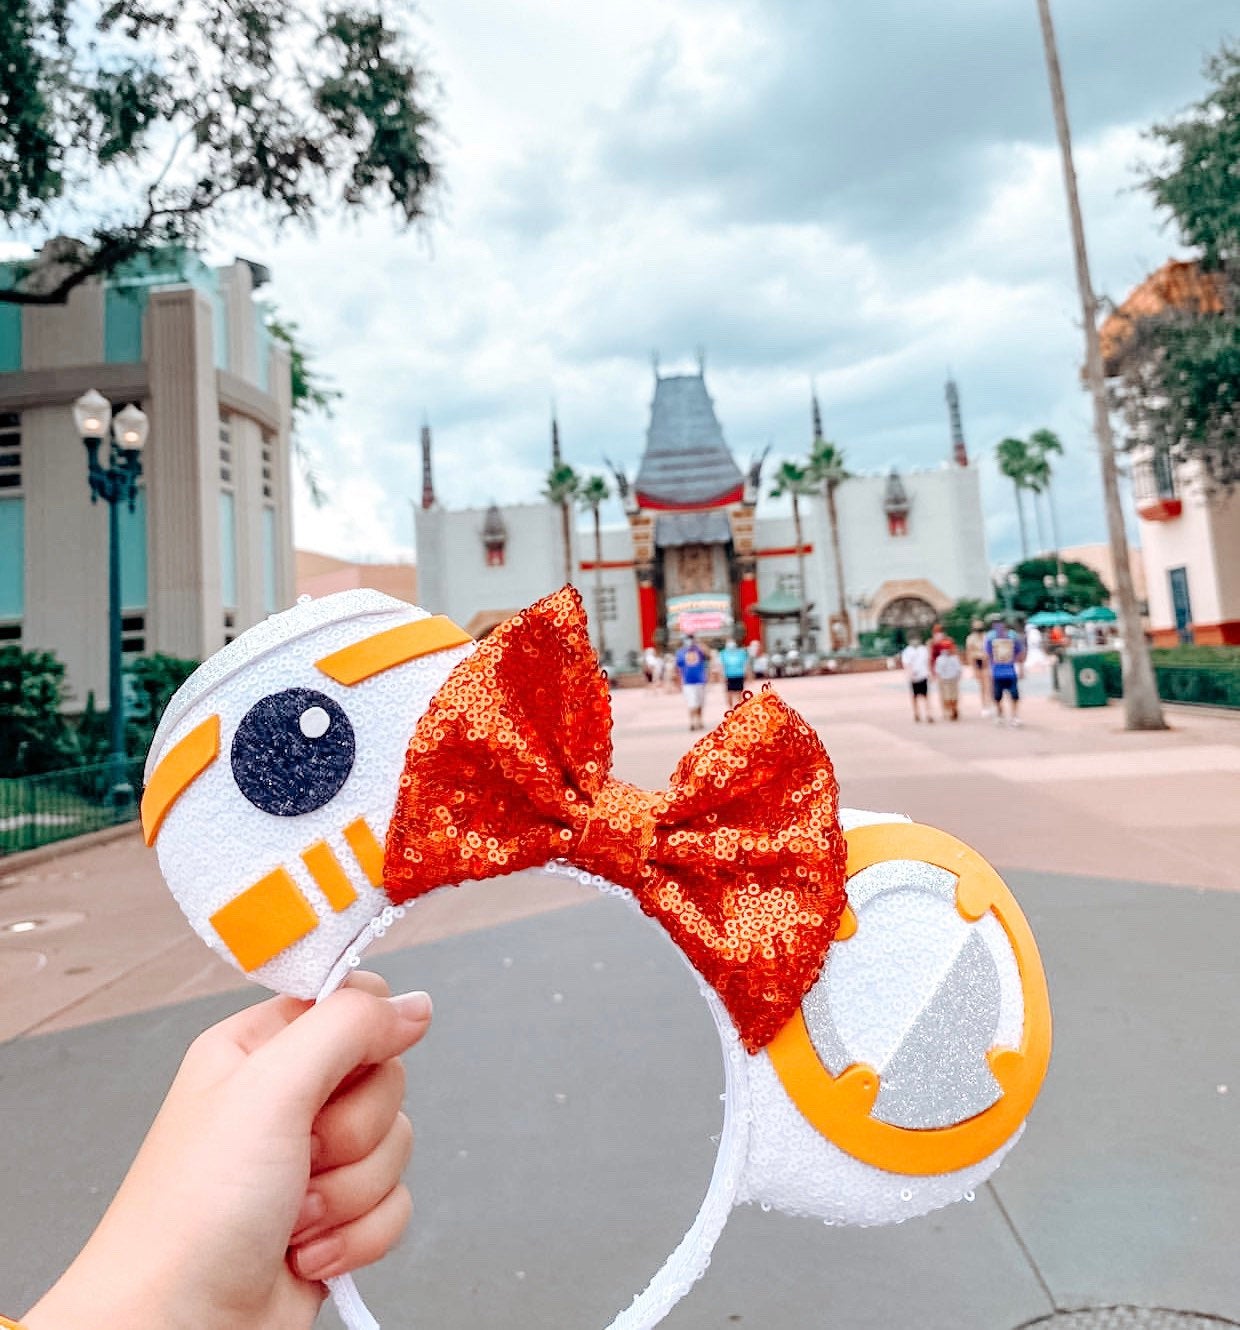 BB-8/Star Wars Inspired Mouse Ears!